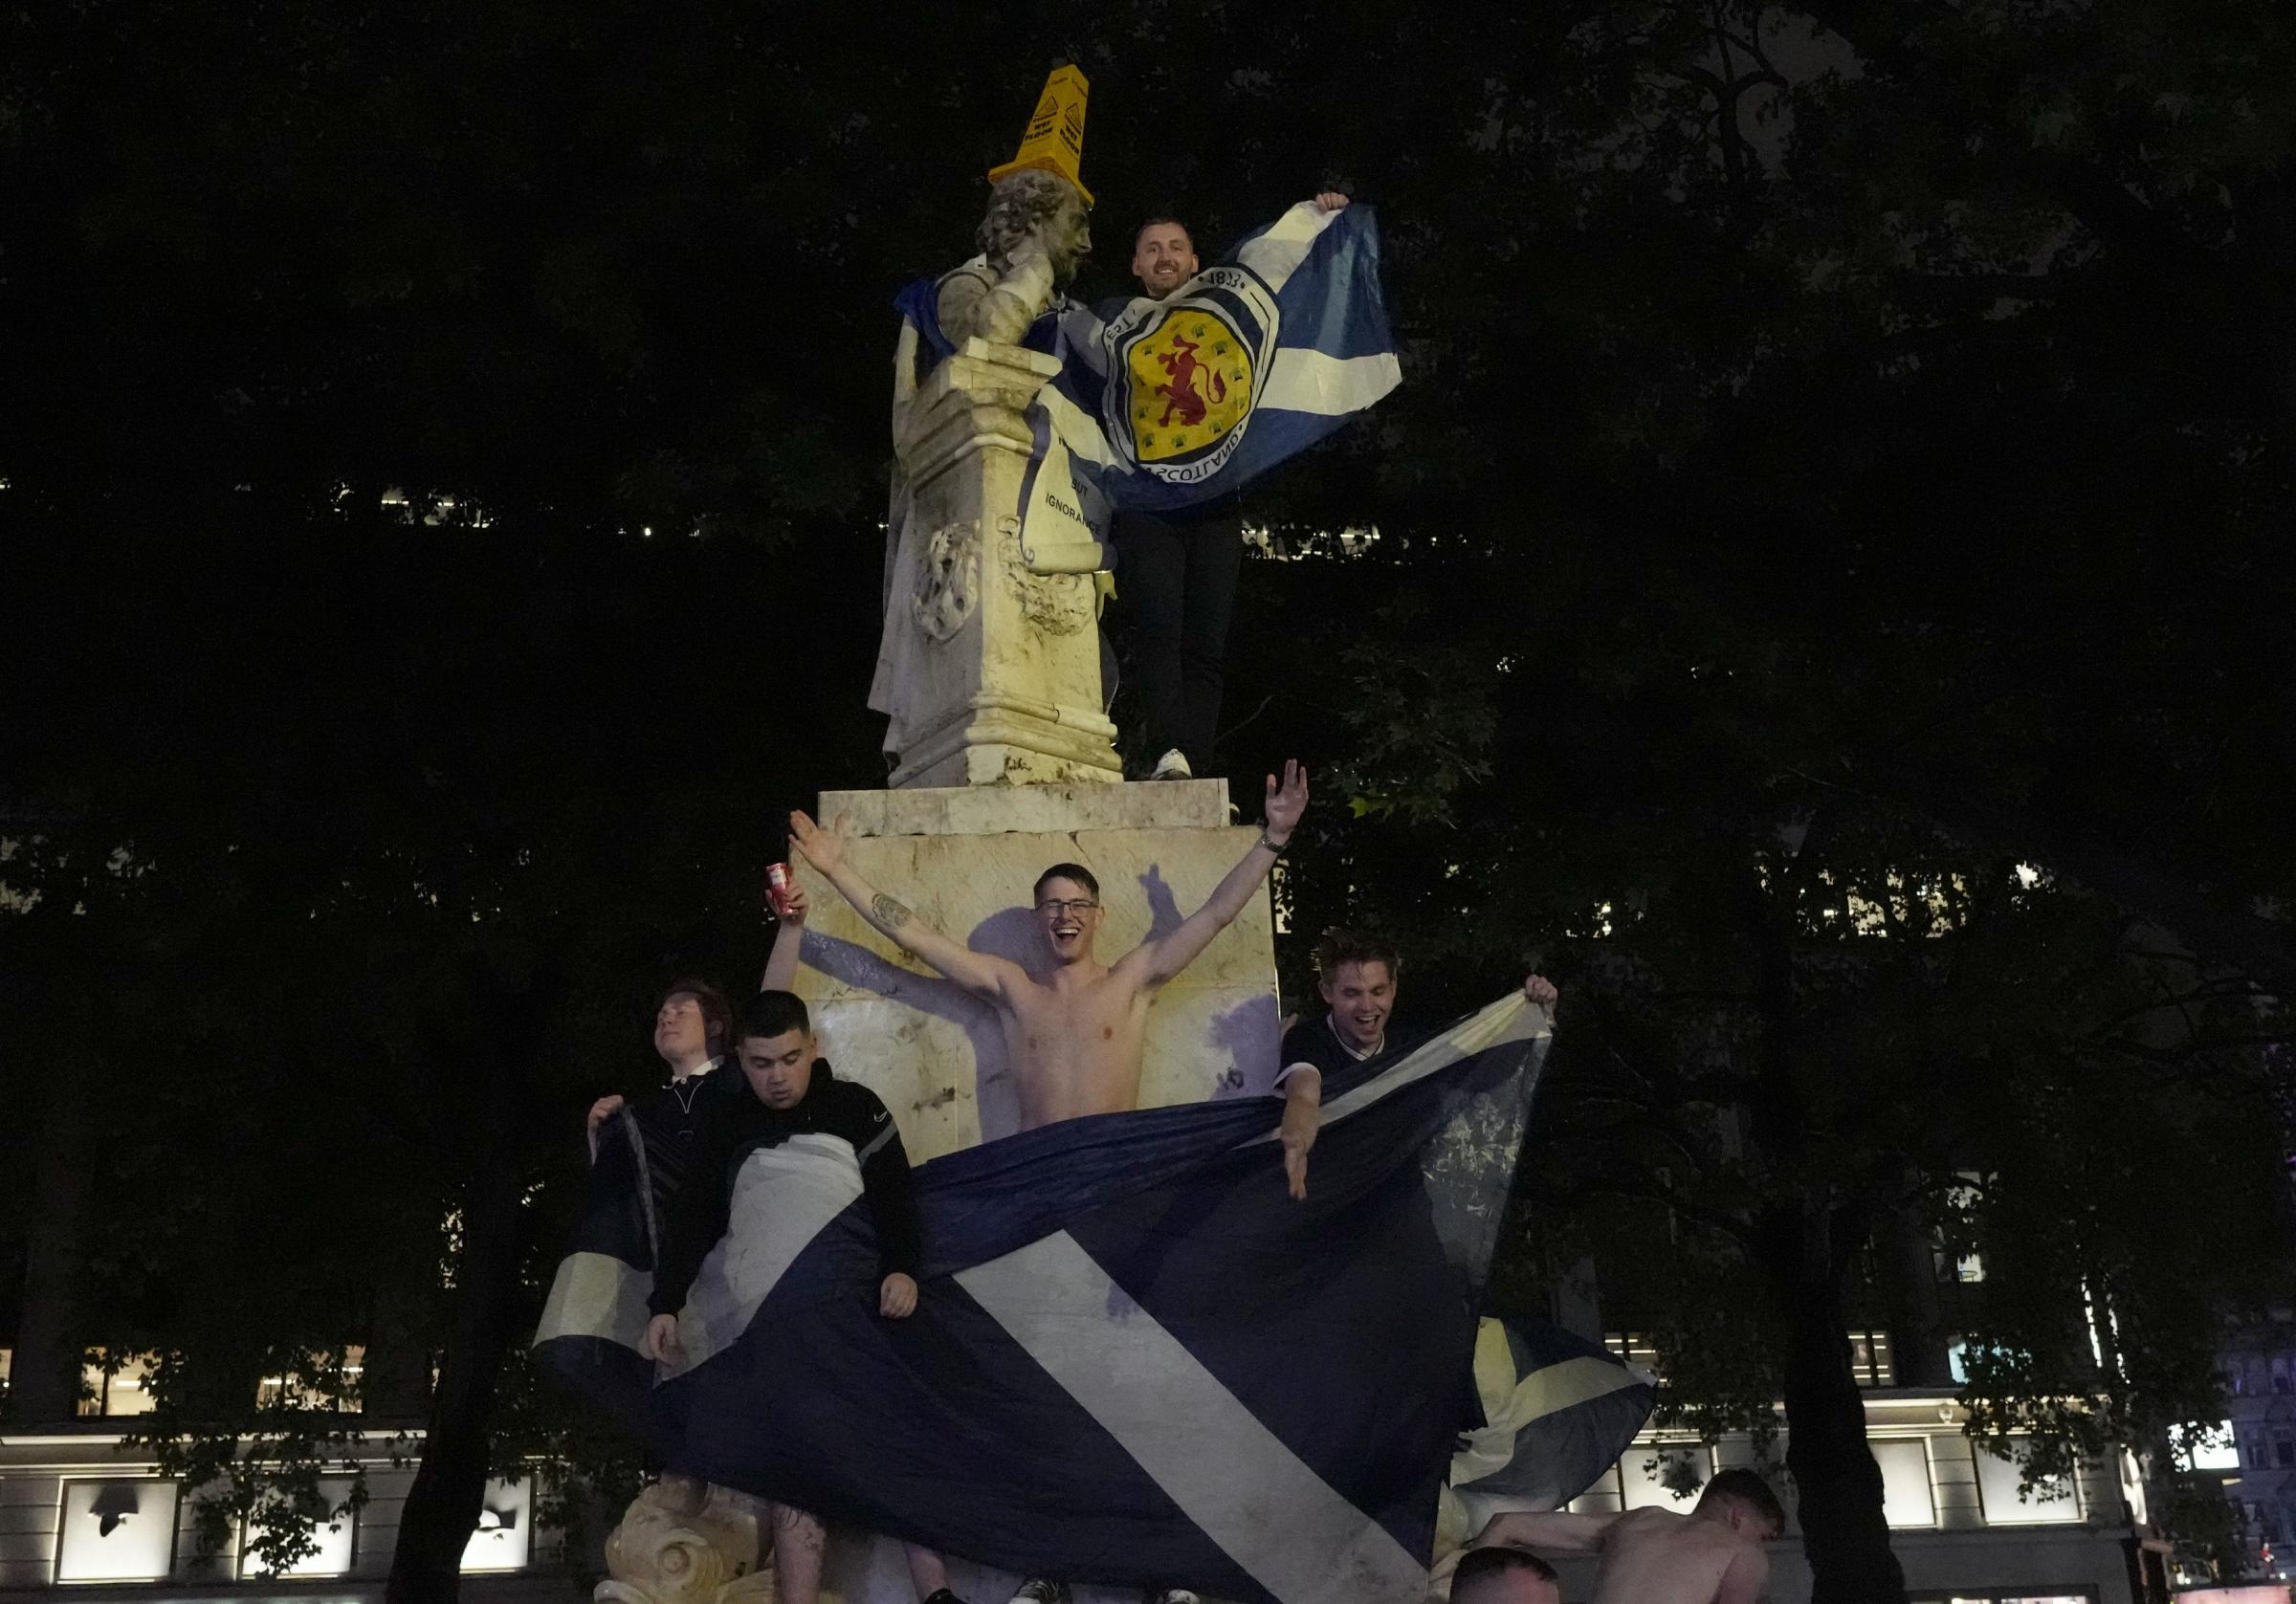 A Scotland supporter holds a flag as he stands on the statue to William Shakespeare in Leicester Square in London, Friday, June 18, 2021 after the Euro 2020 soccer championship group D match between England and Scotland at Wembley Stadium. The match